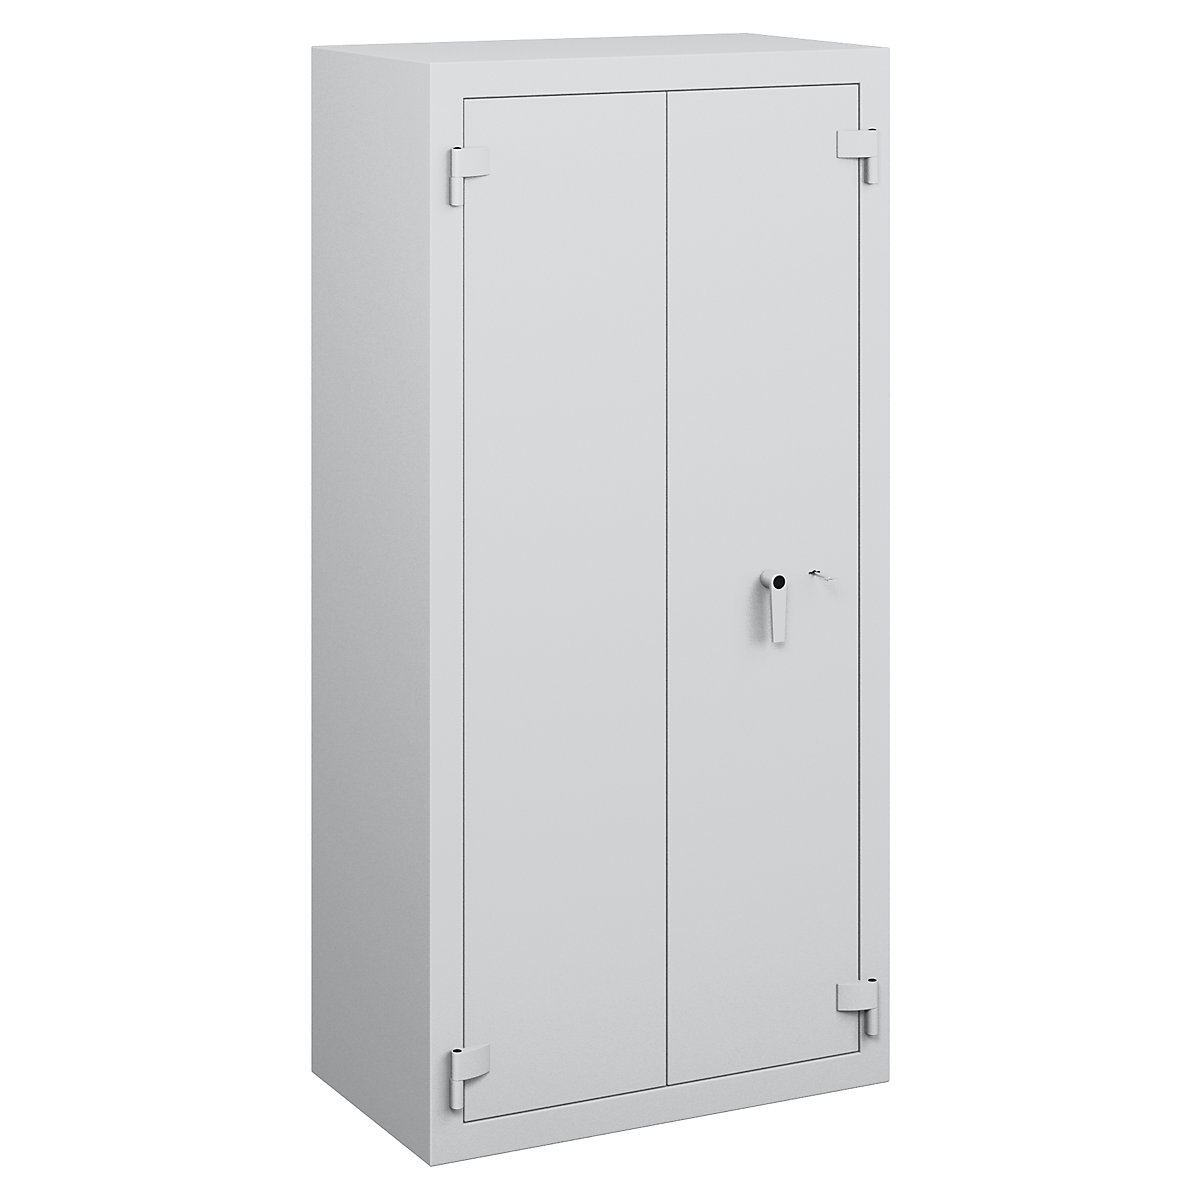 Standard safety cabinet, VDMA B, S2, HxWxD 1950 x 950 x 500 mm, with double door-6